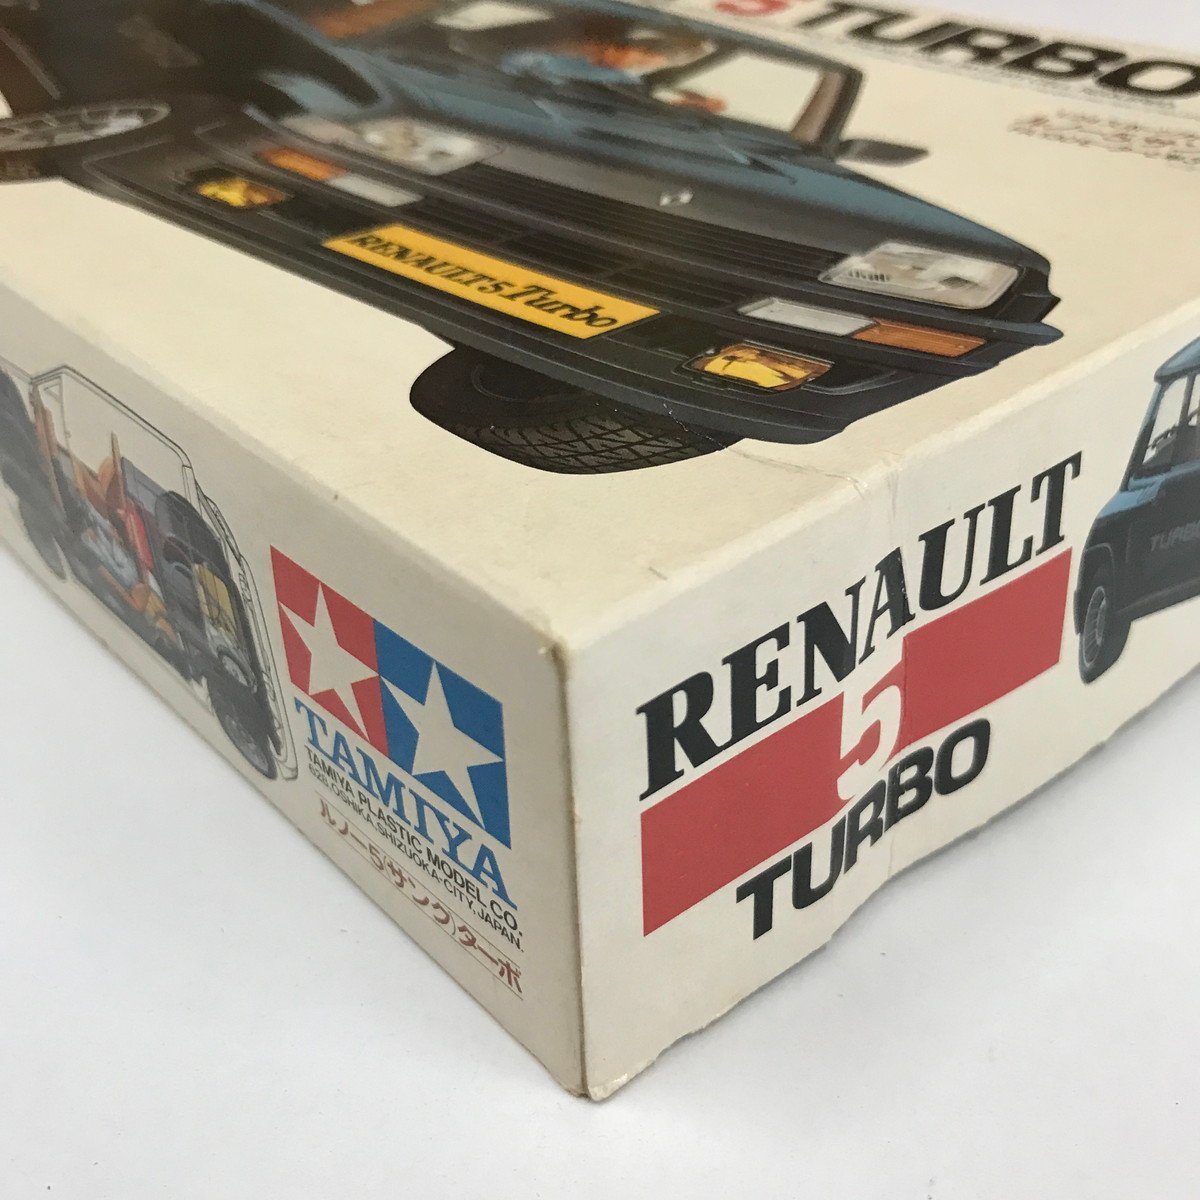 ND/L/[ not yet constructed ] Renault 5( thank ) turbo 1/24 sport car series No.24/TAMIYA/RENAULT 5 TURBO/ plastic model 